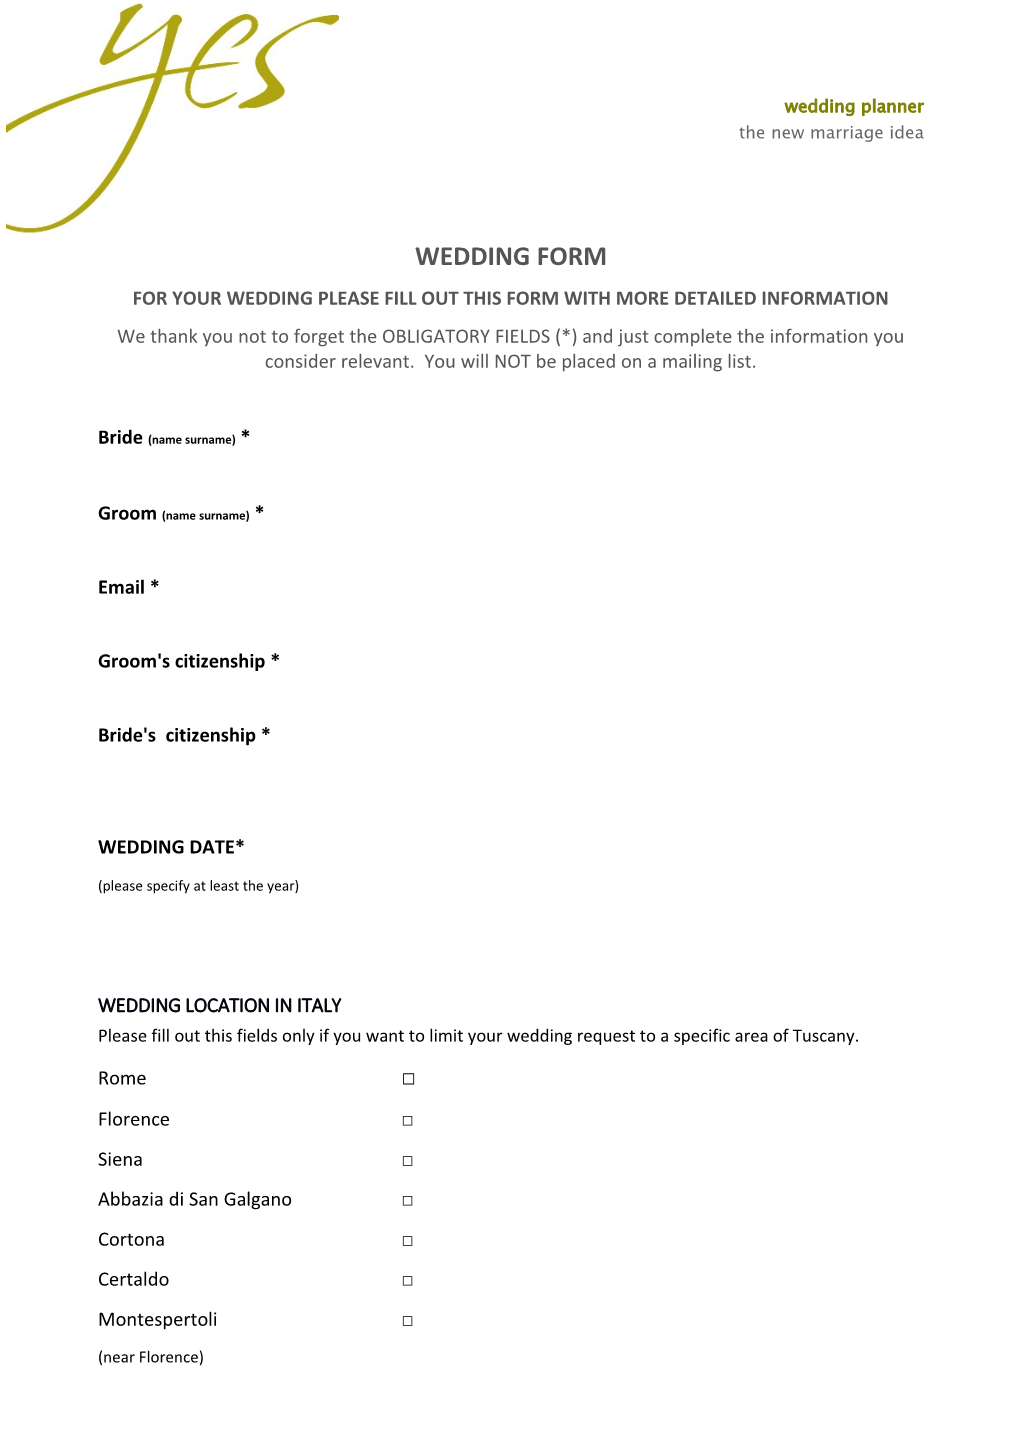 For Your Wedding Please Fill out This Form with More Detailed Information